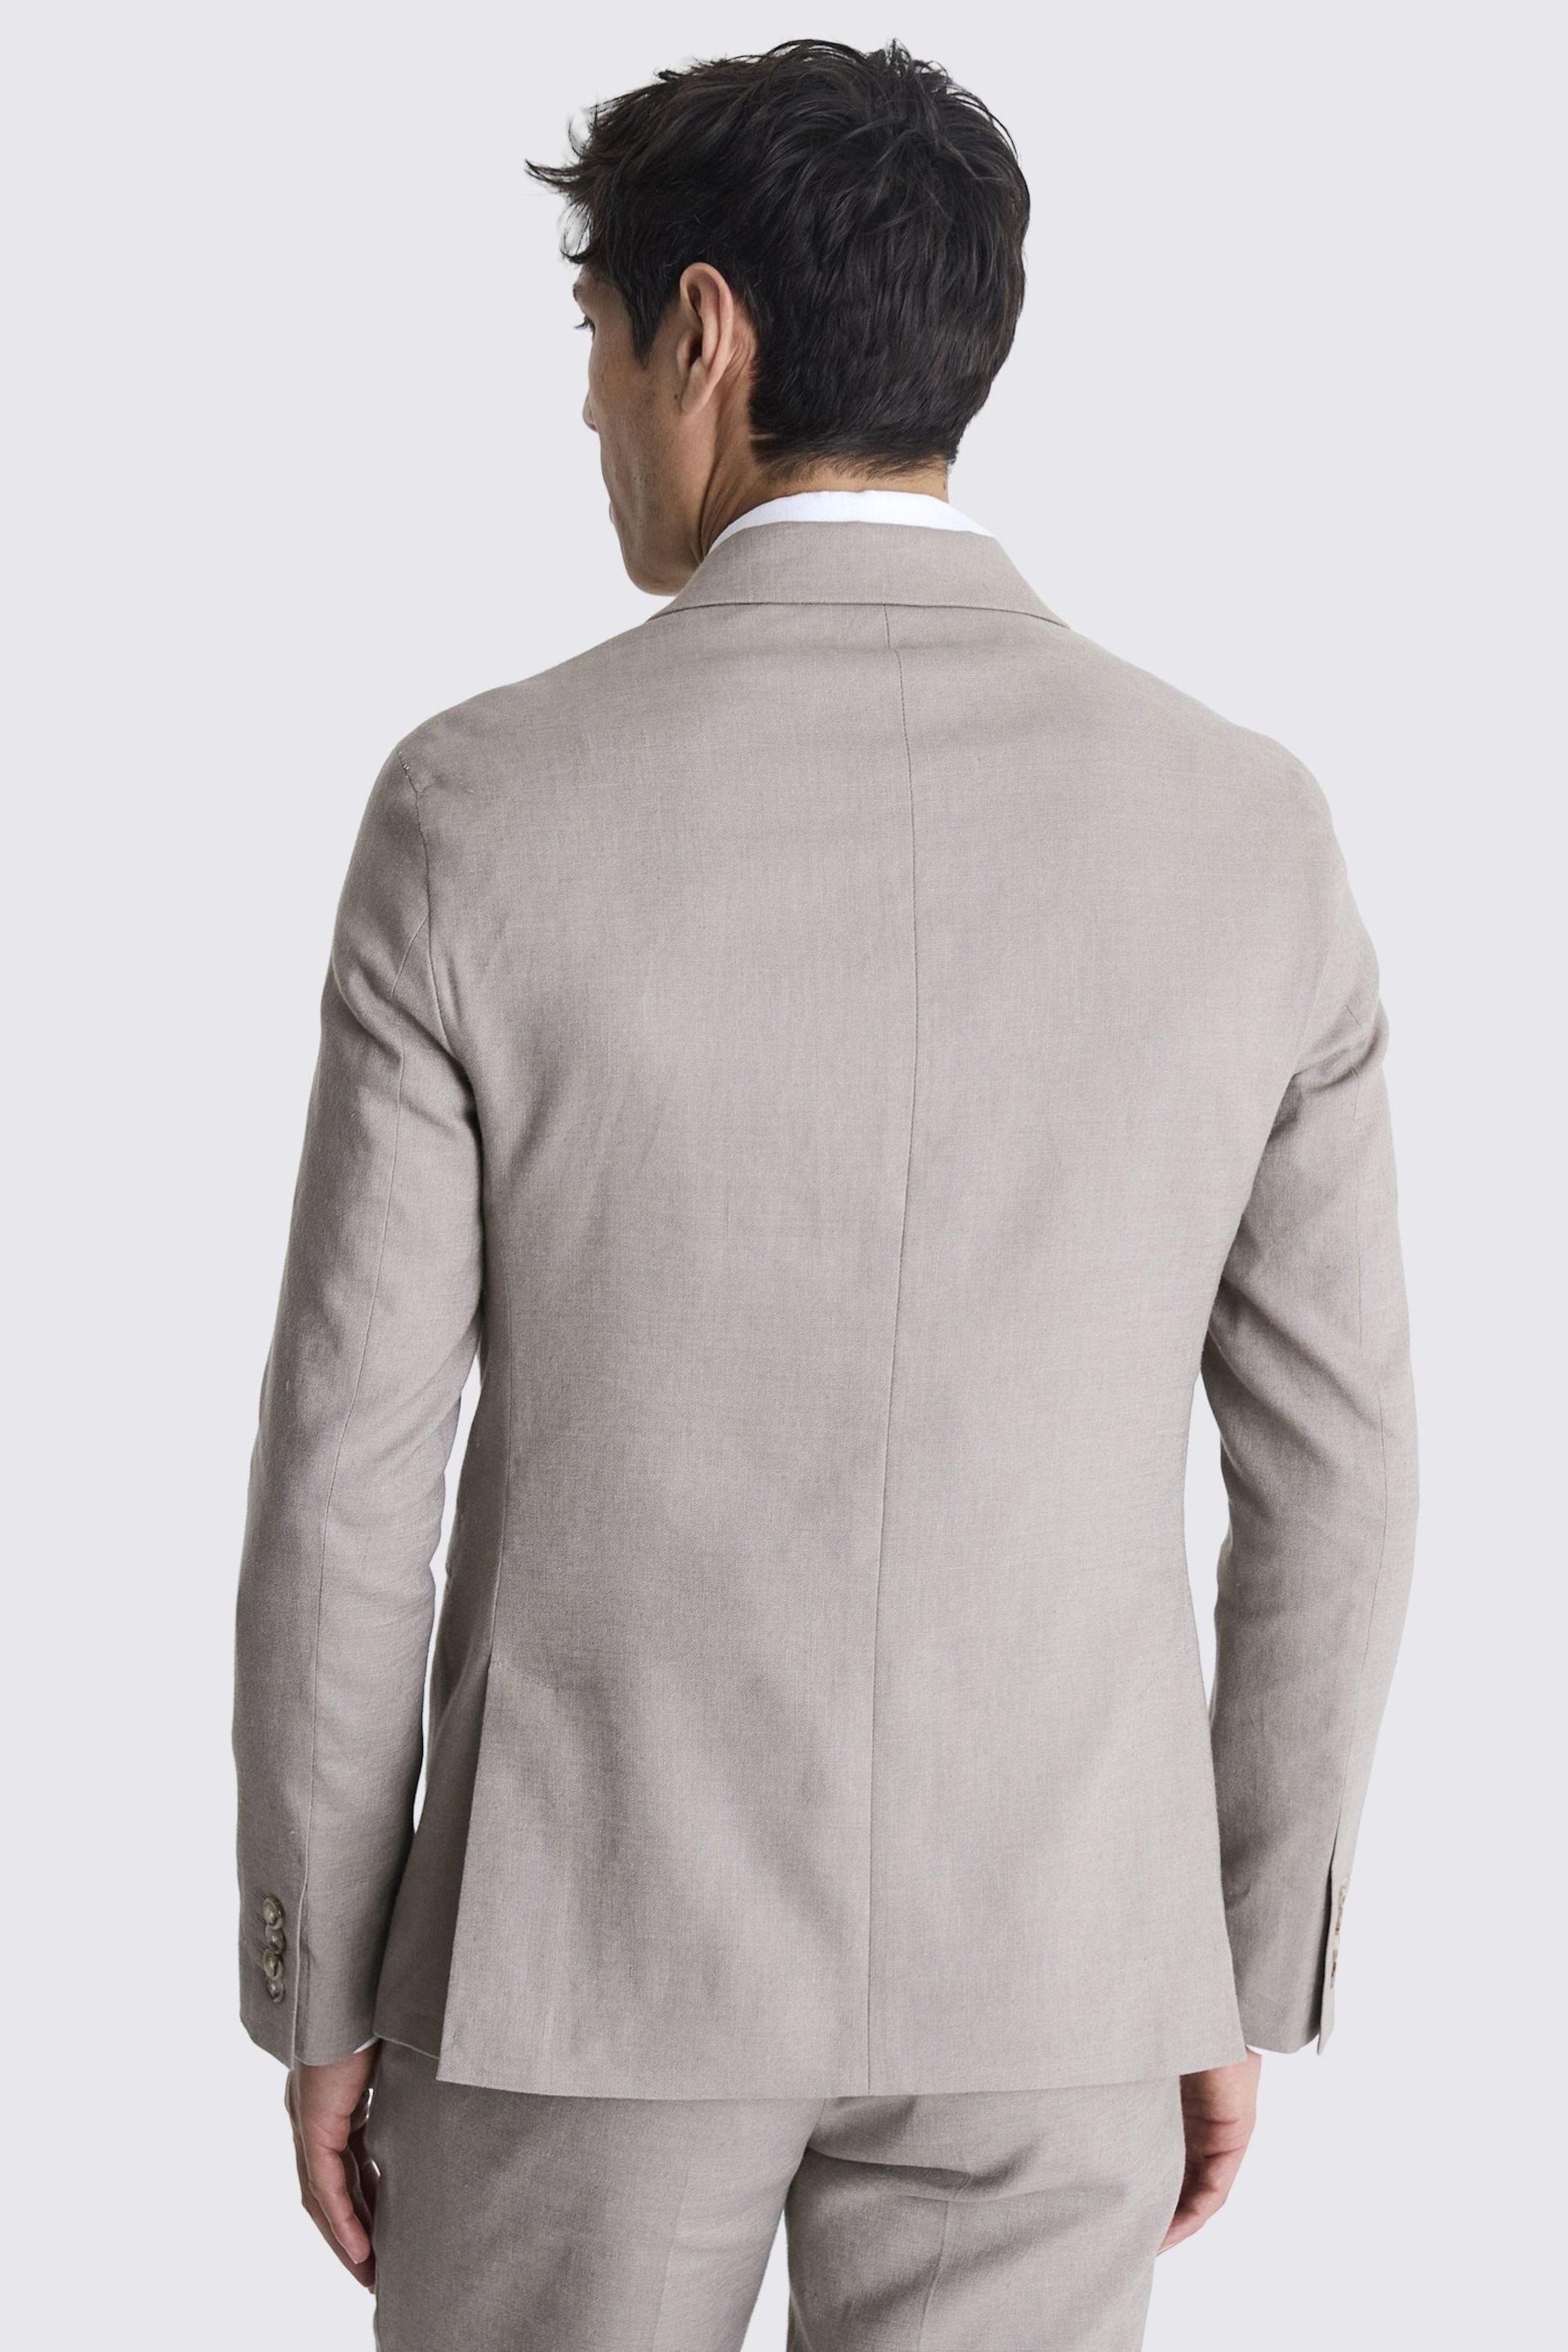 MOSS Slim Fit Taupe Matte Linen Double Breasted Grey Jacket - Image 3 of 5